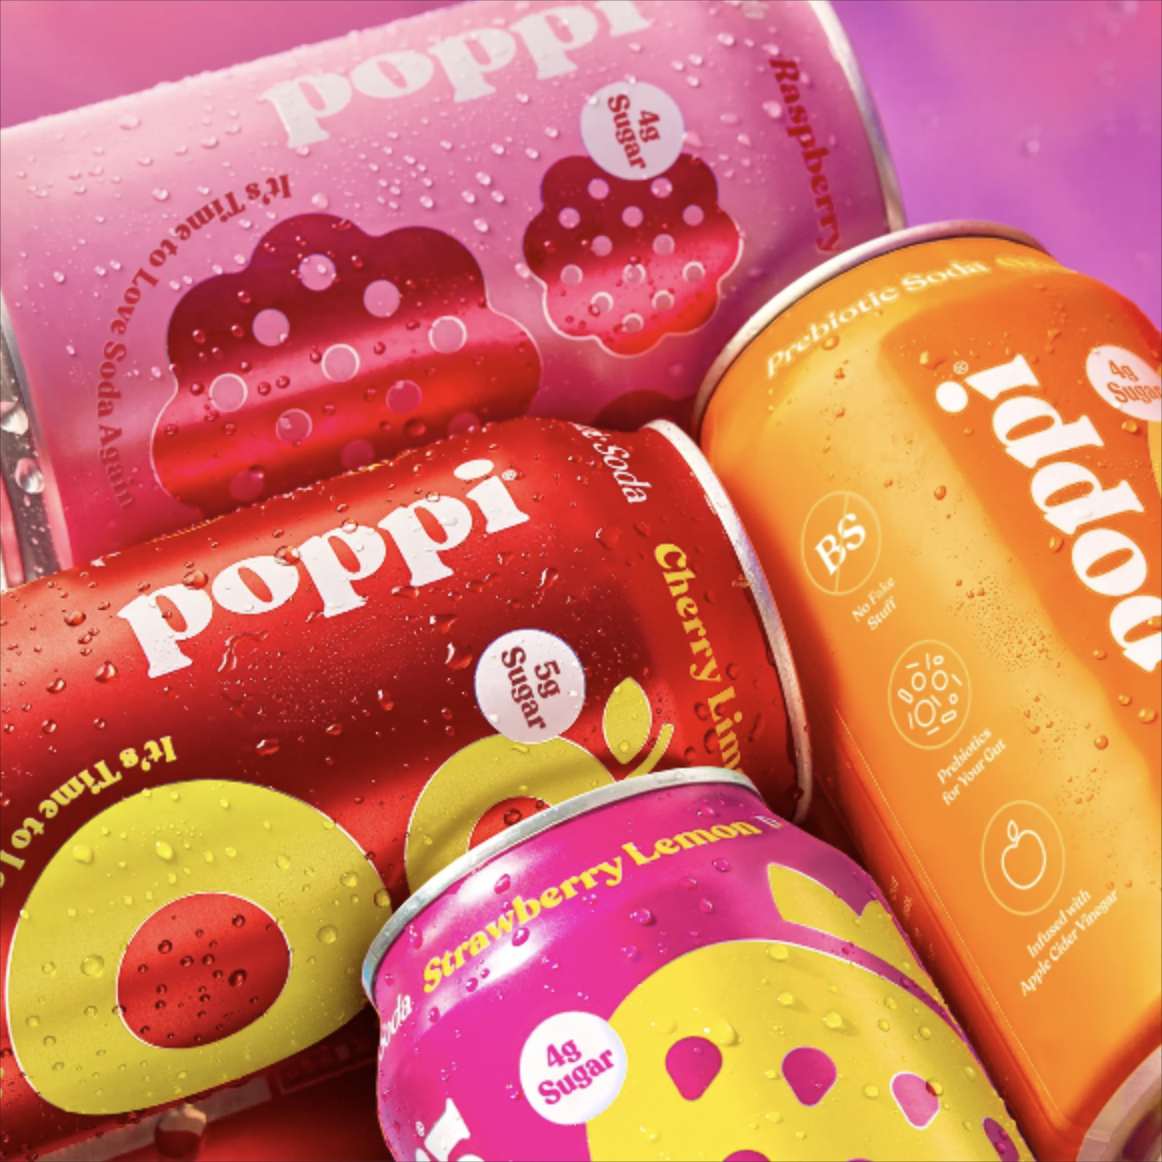 Poppi’s "Gut Healthy" Soda Might Not Be So "Gut Healthy" After All